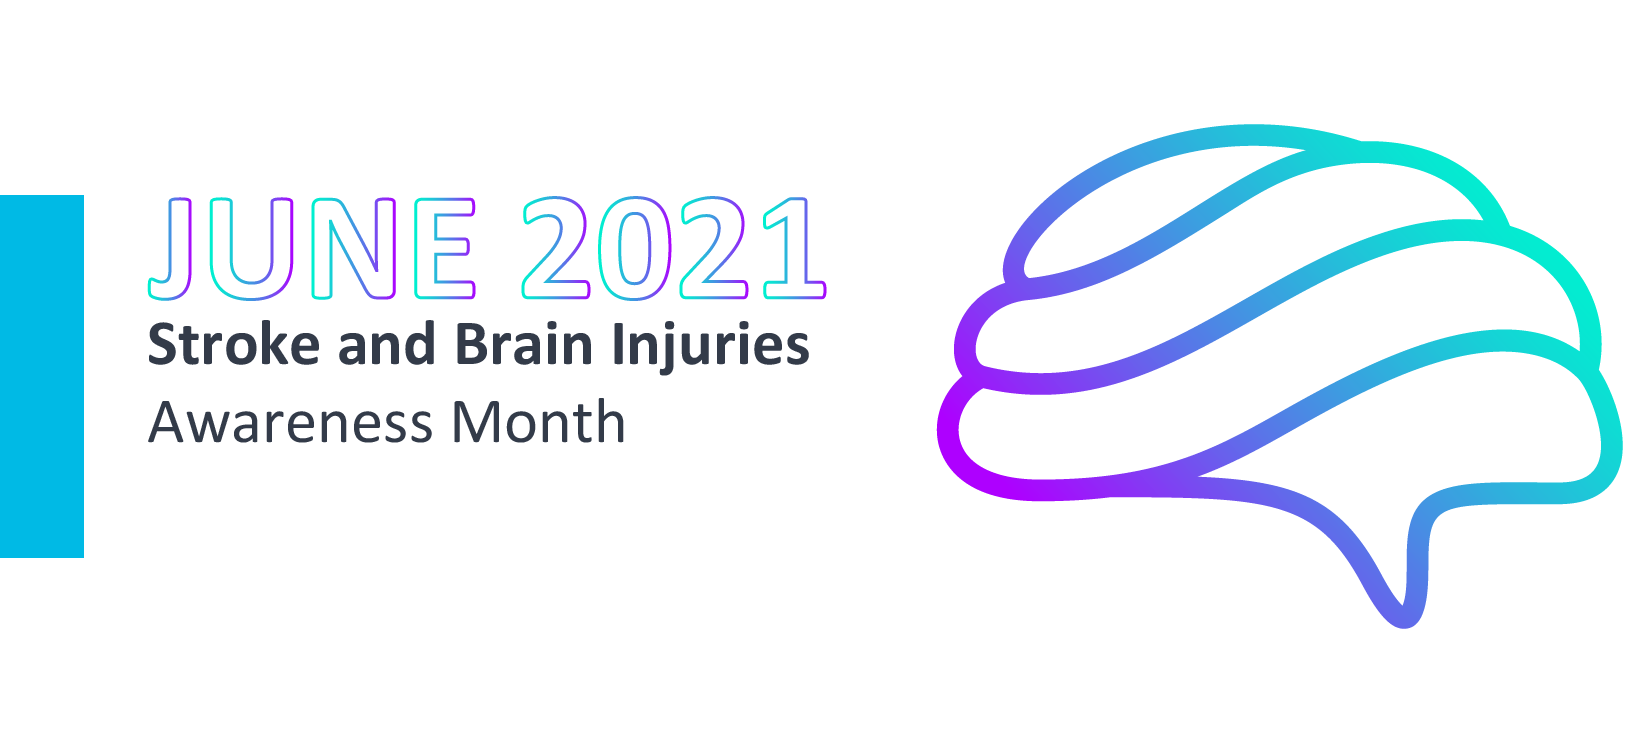 Stroke and Brain Injuries Awareness Month